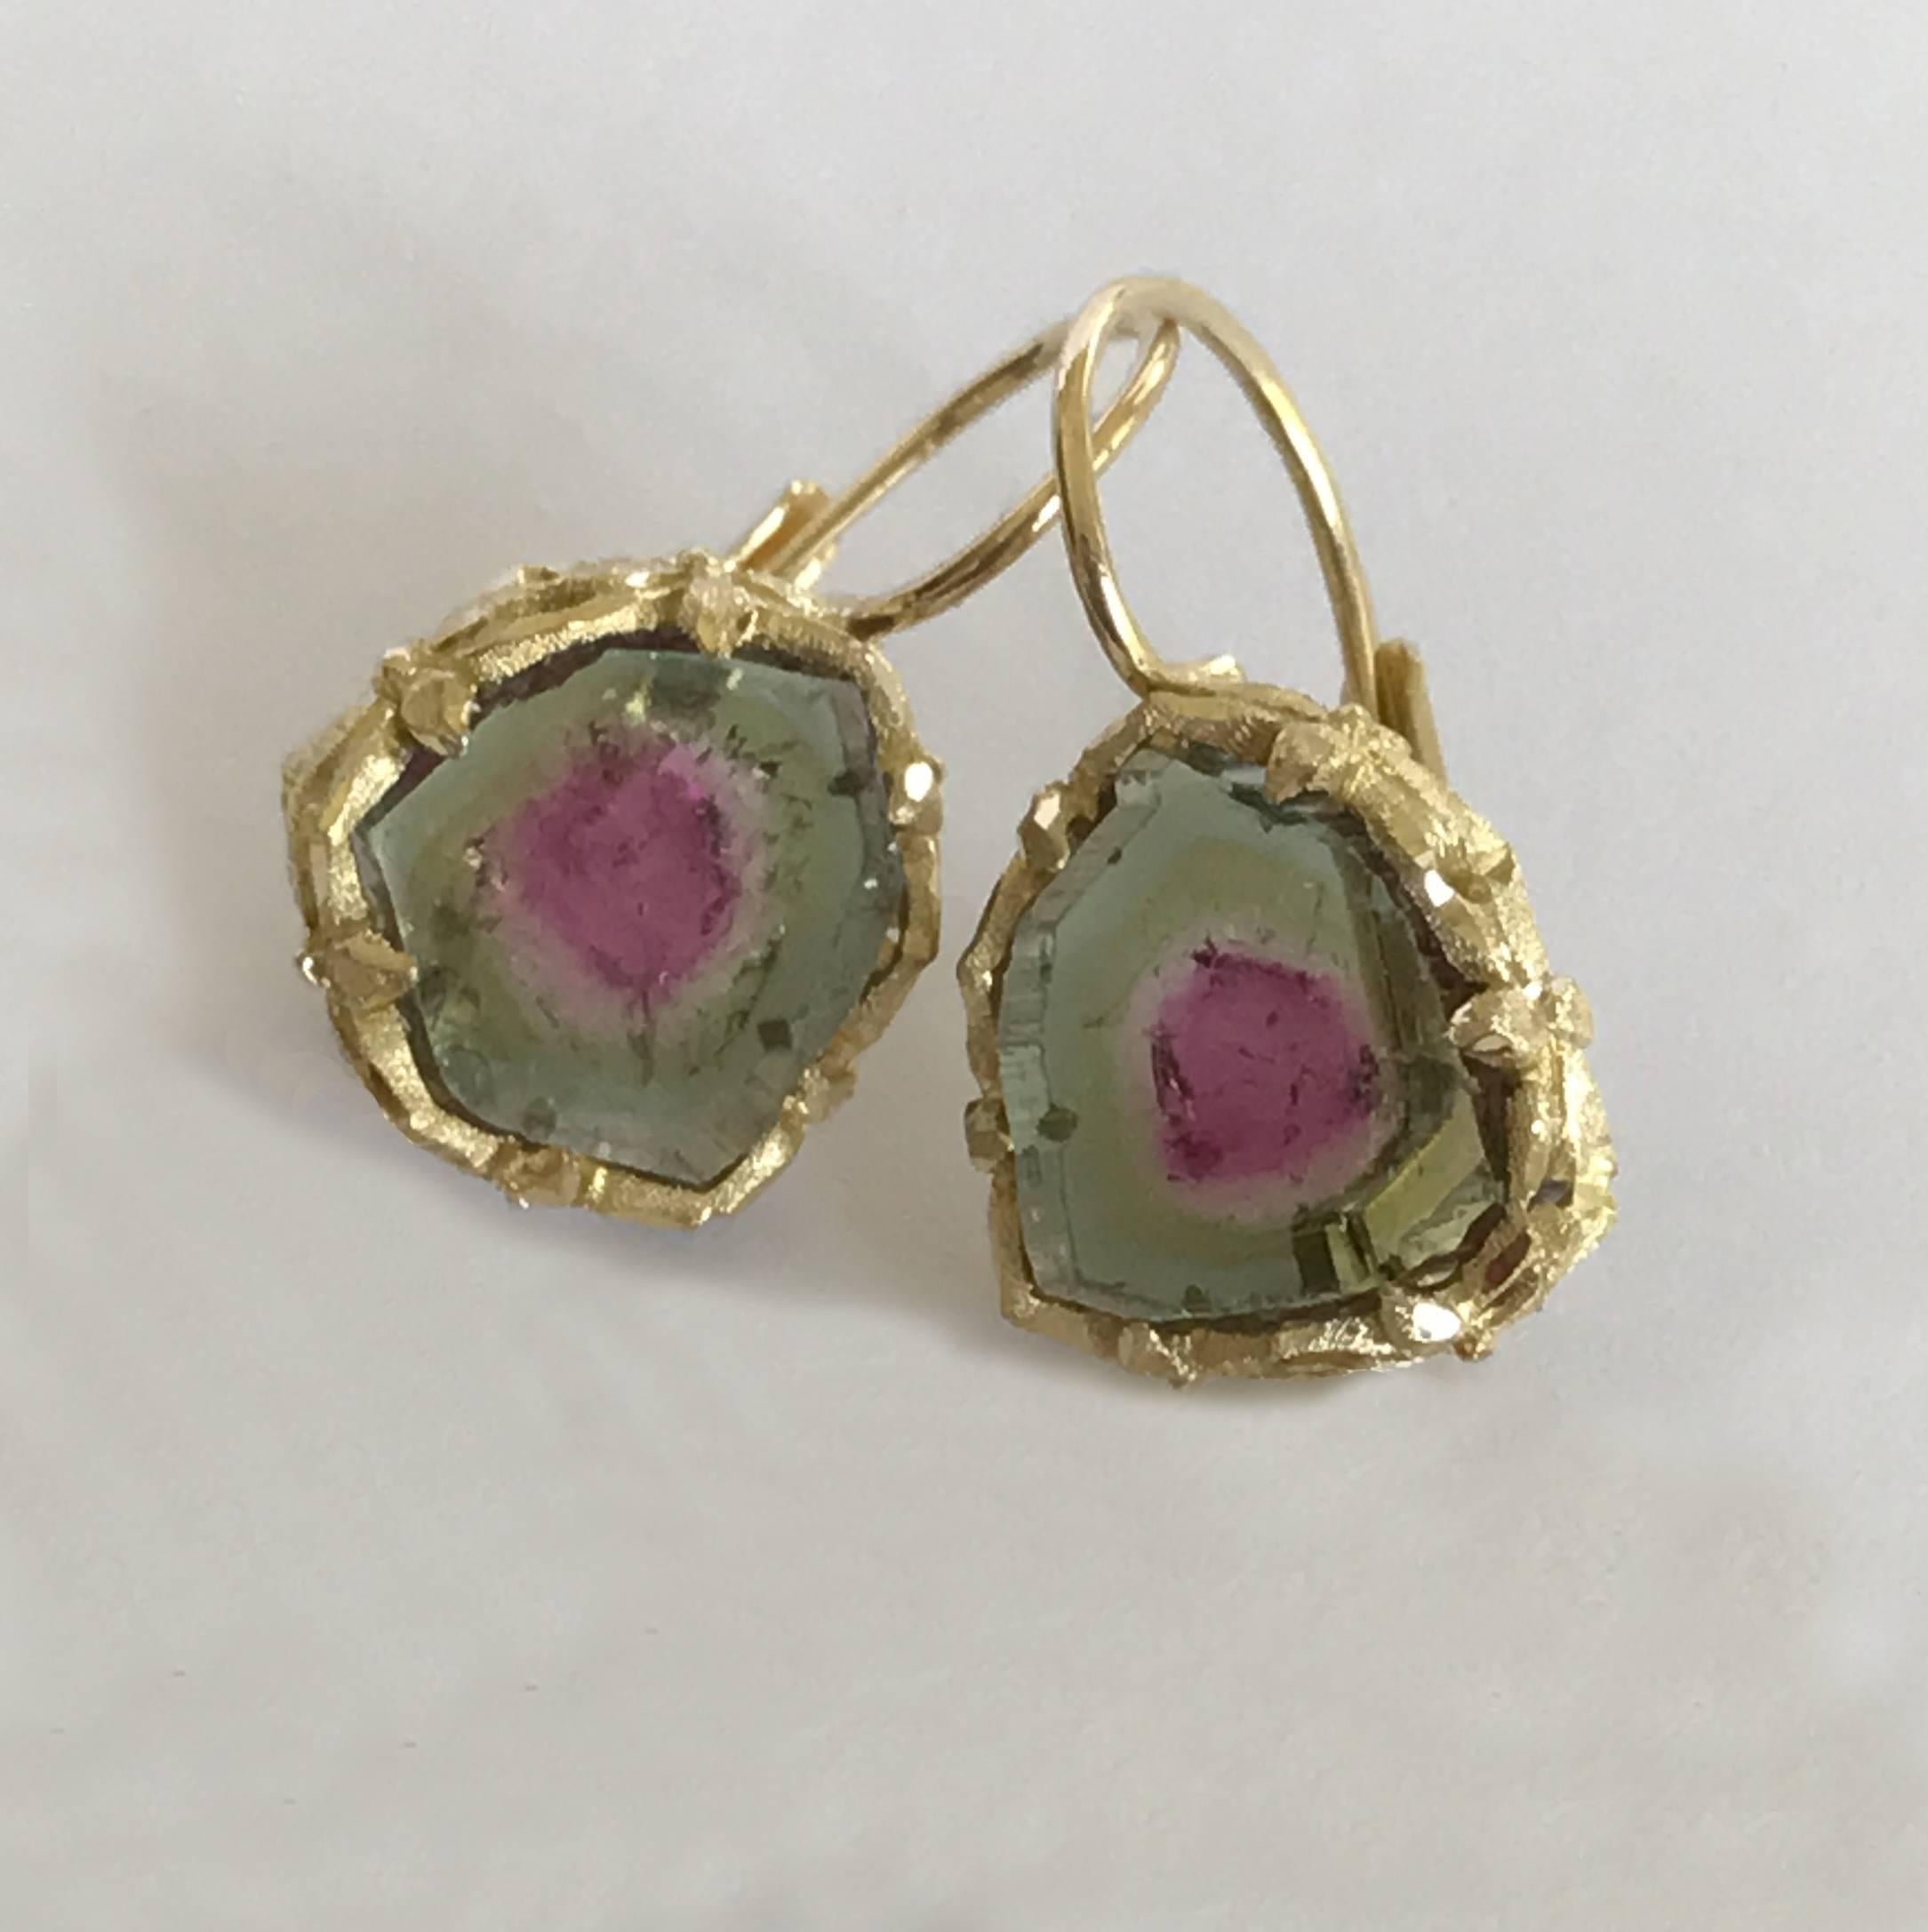 Dalben design 18 kt hand engraved yellow gold earrings with two red-green watermelon  Tourmaline . 
Dimension: 
width 12,6 mm height without leverback 12,9 mm  
Height with leverback 21 mm
The earrings has been designed and handcrafted in our